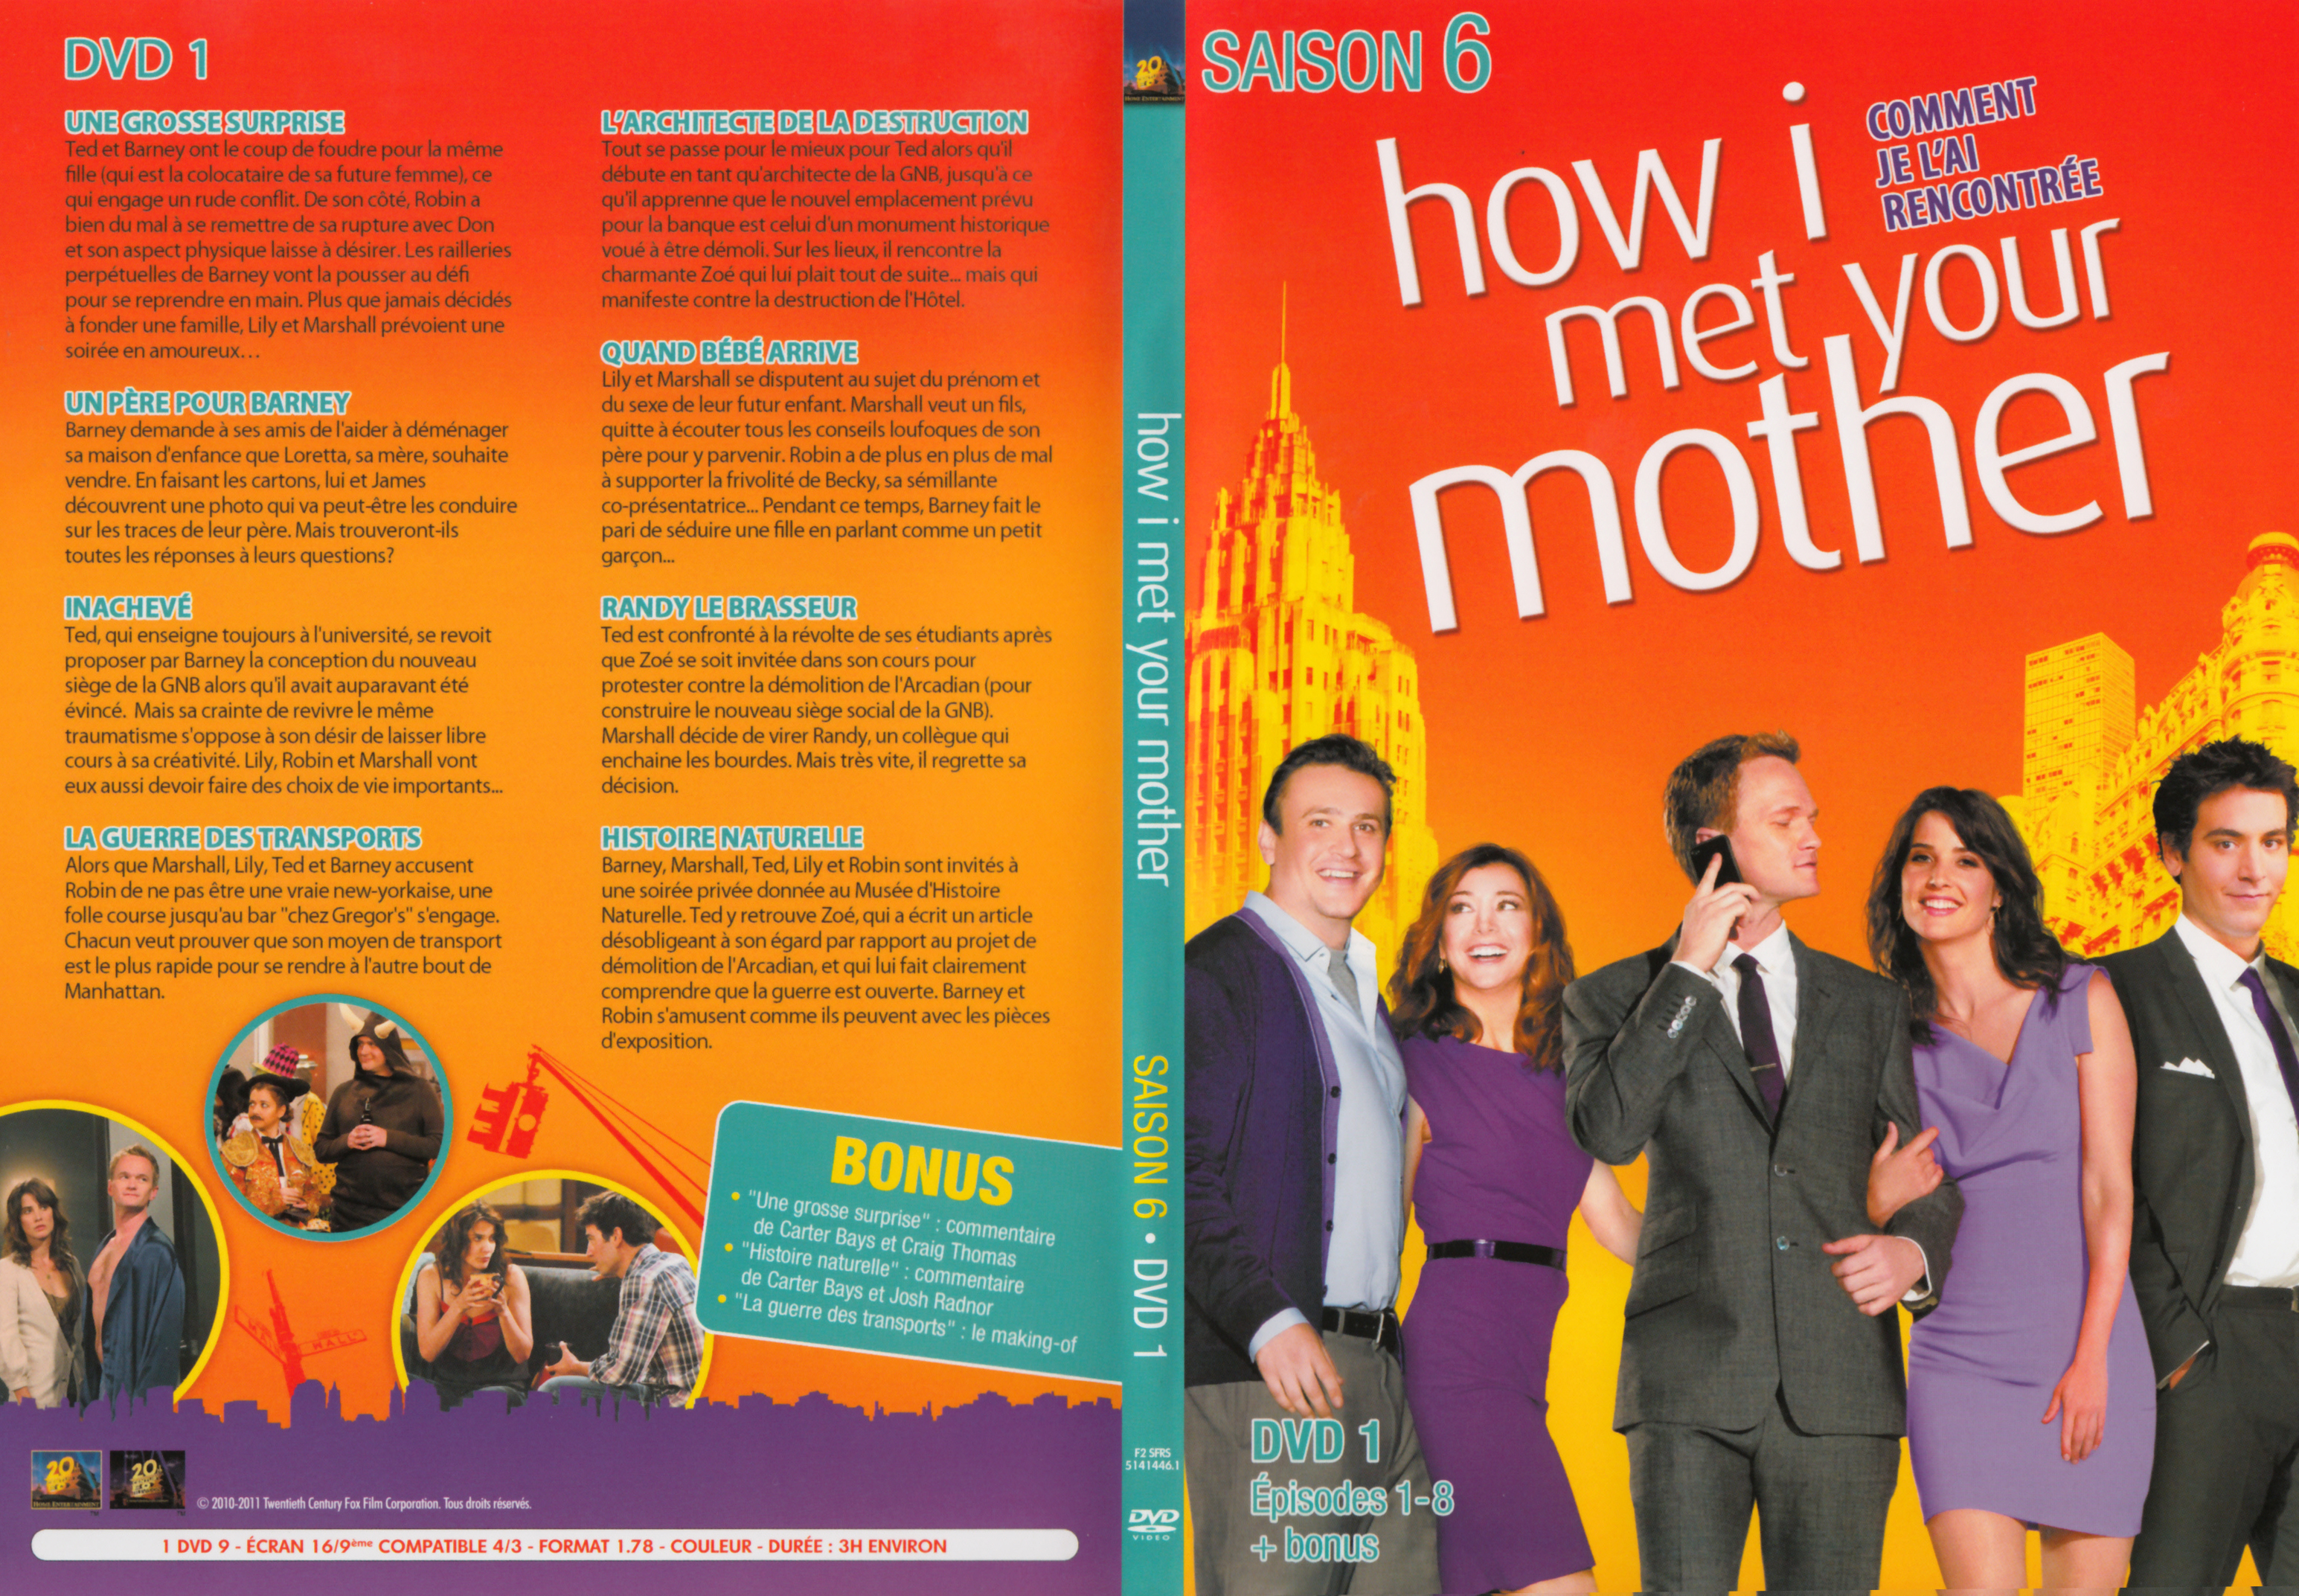 Jaquette DVD How i met your mother Saison 6 DVD 1